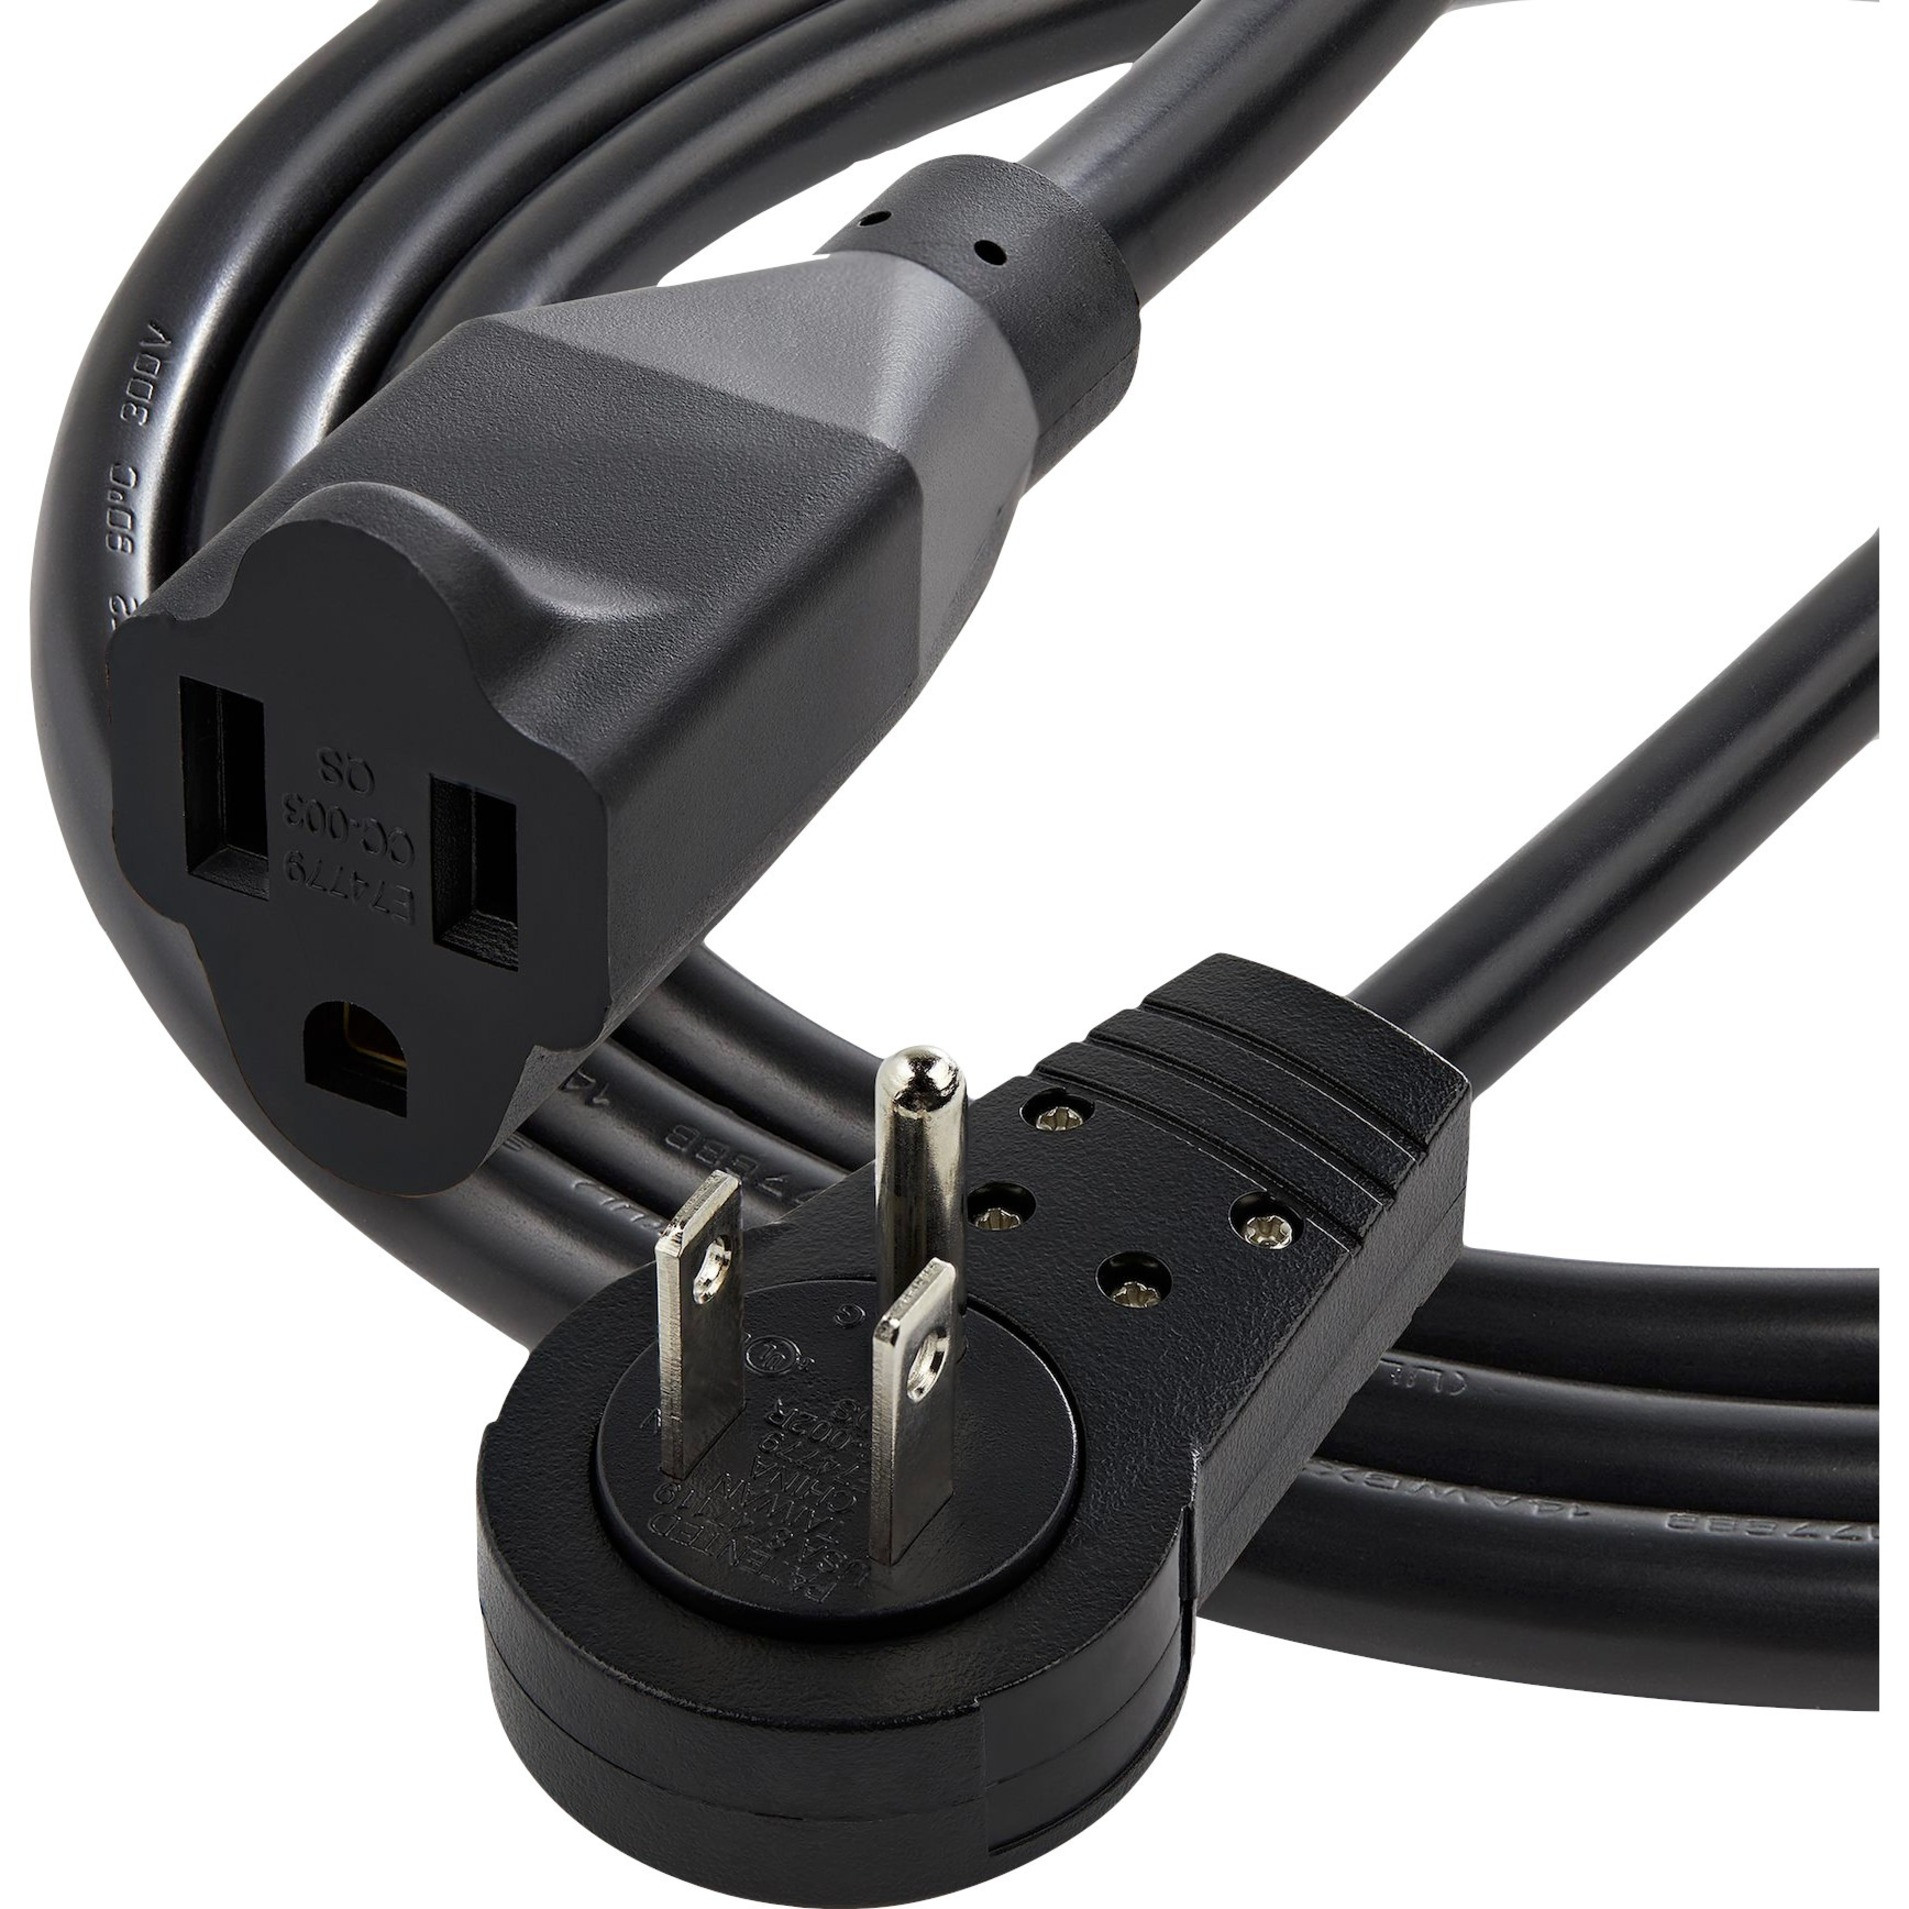 Startech .com Power Extension CordFor PC, Monitor, Scanner, PrinterBlack10 ft Cord Length RTPAC10110